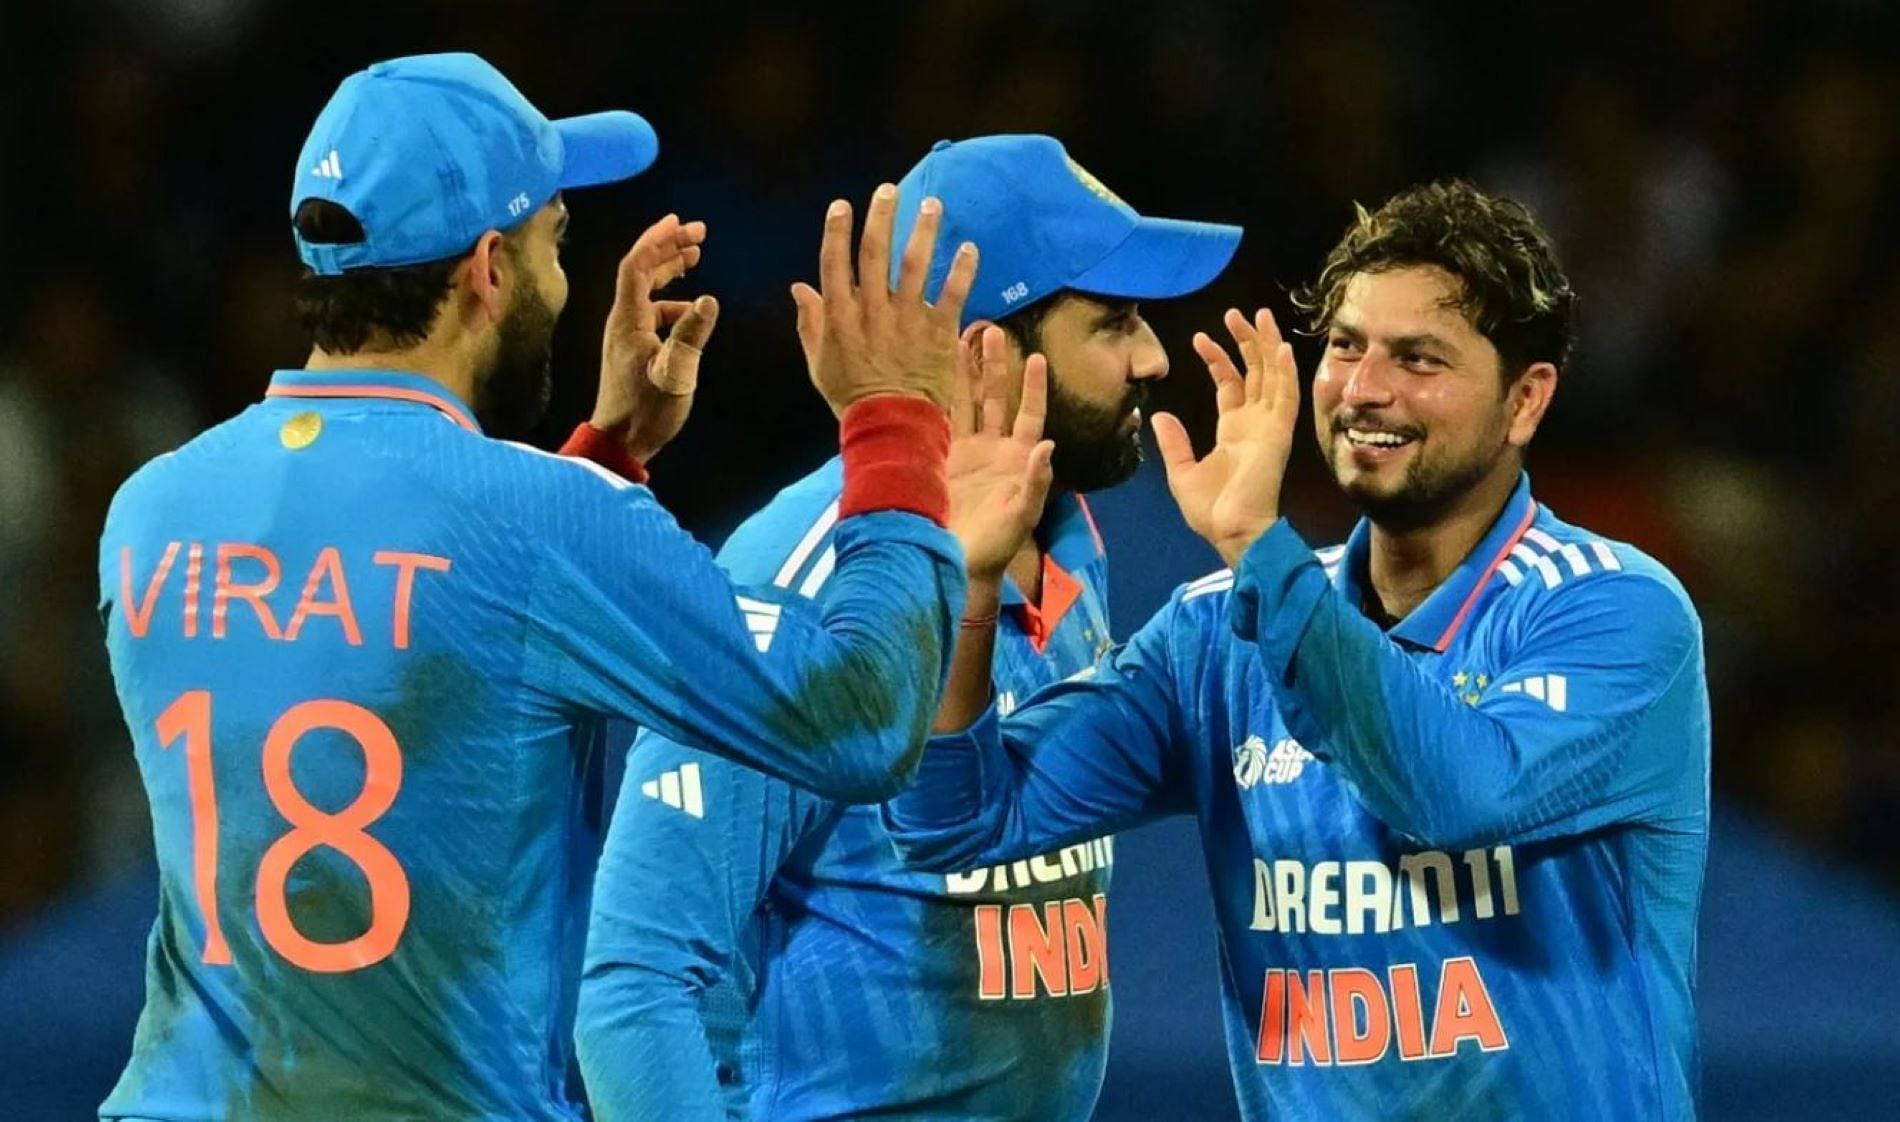 Team India pulled off a thrilling victory in a low-scoring encounter